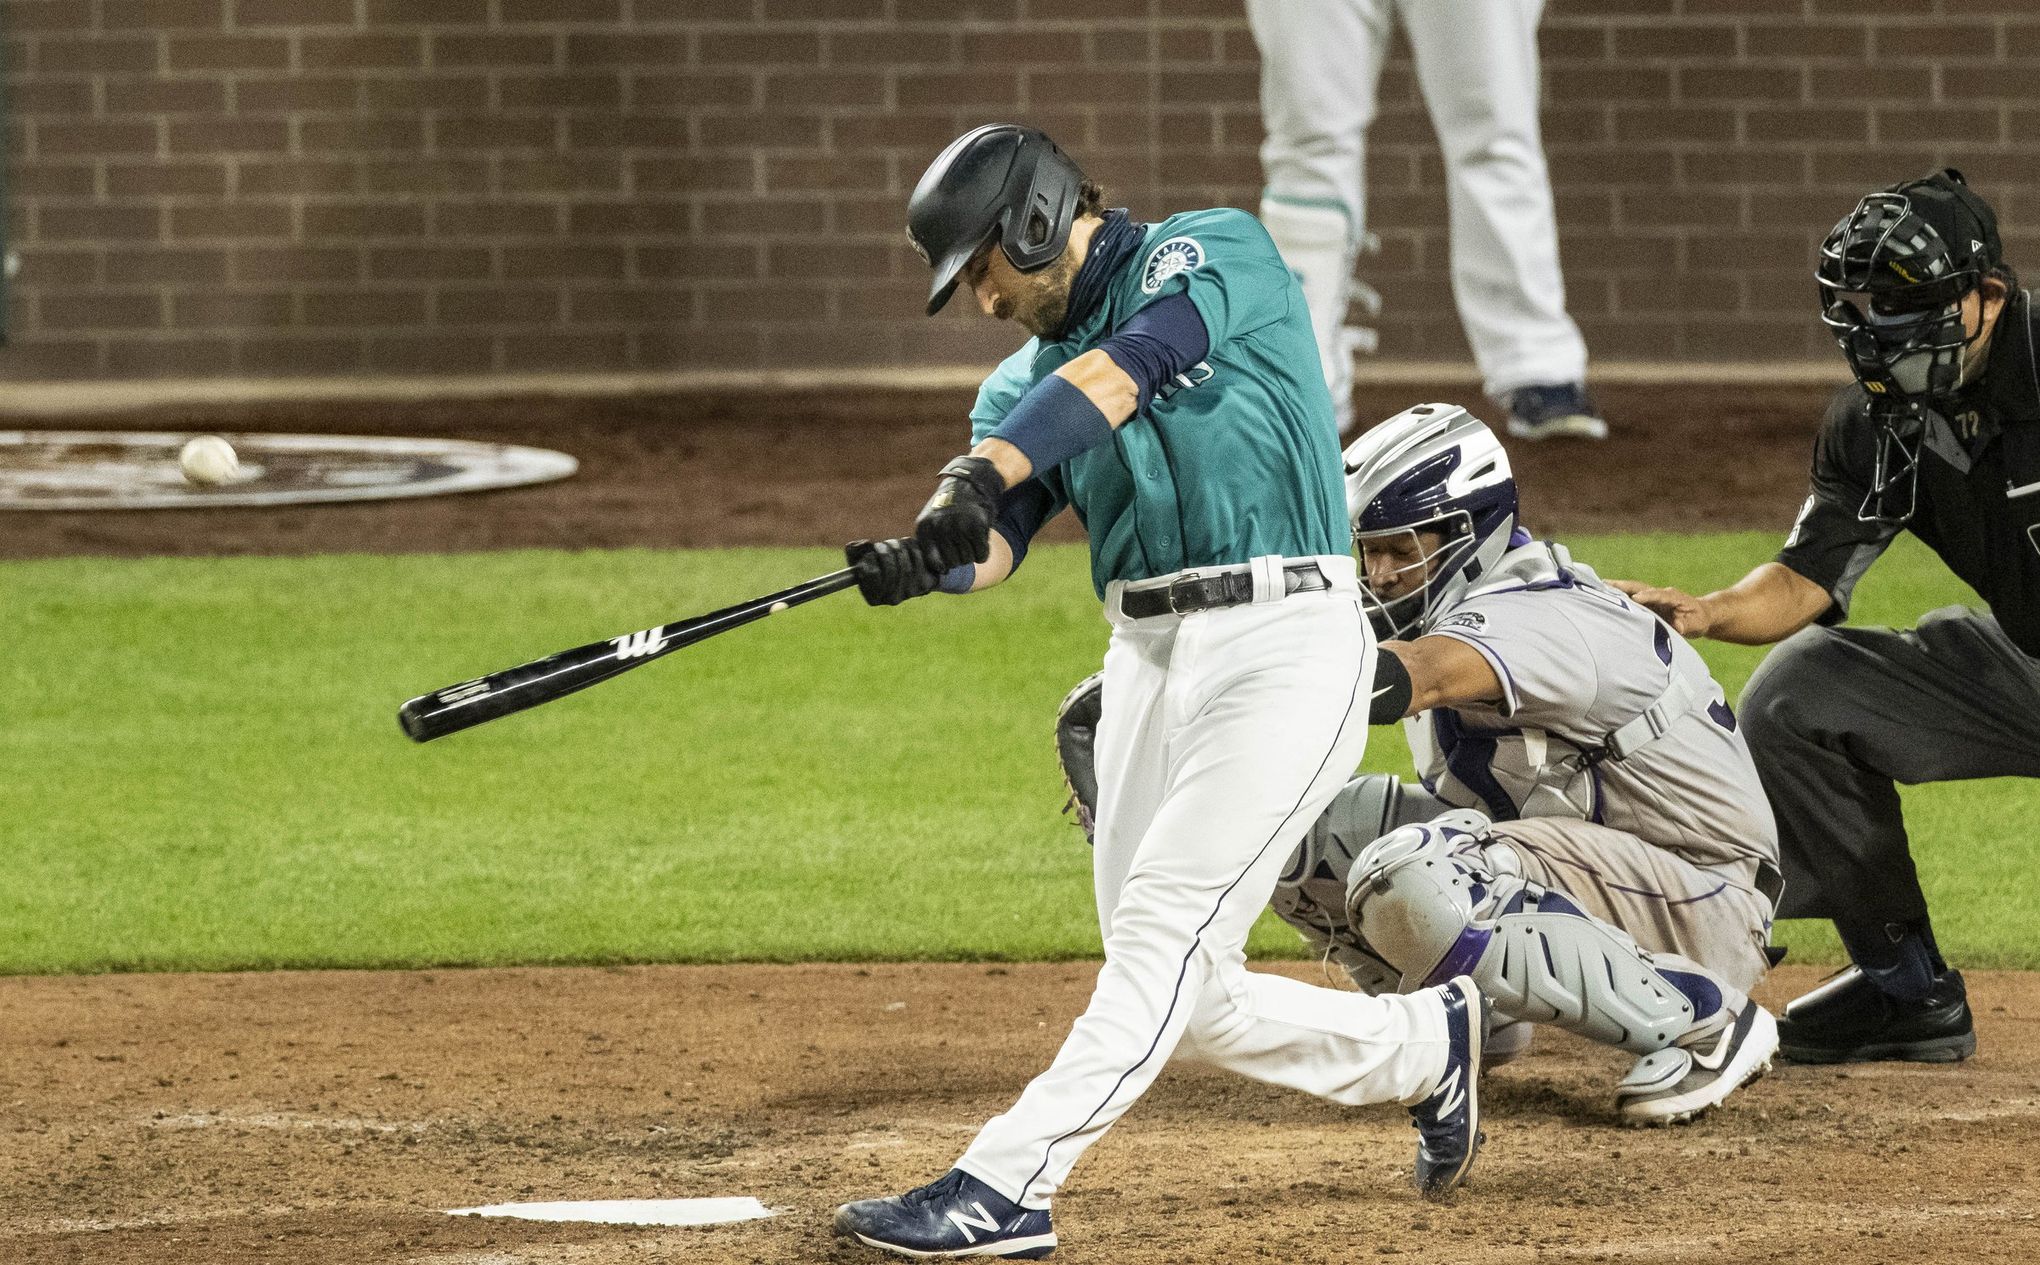 The Mariners' Austin Nola has found offensive success - Beyond the Box Score